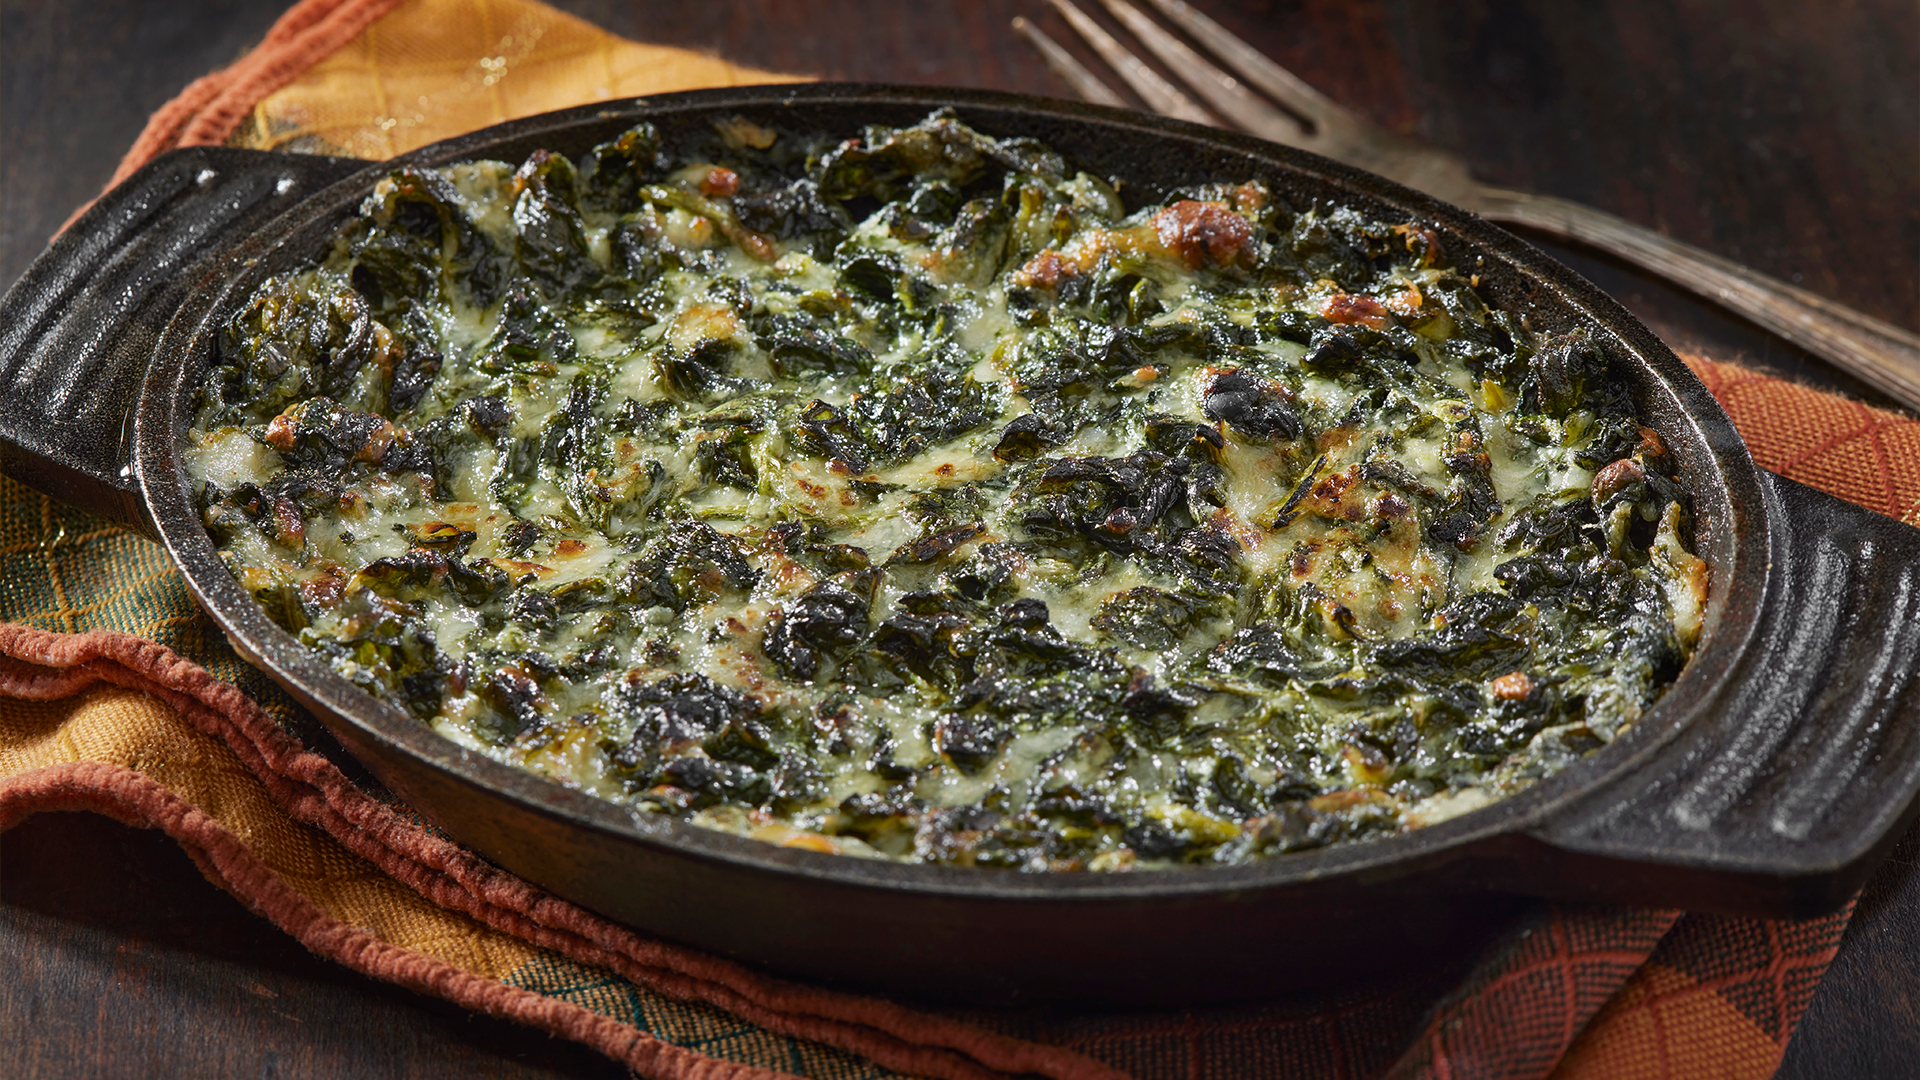 Classic creamed spinach